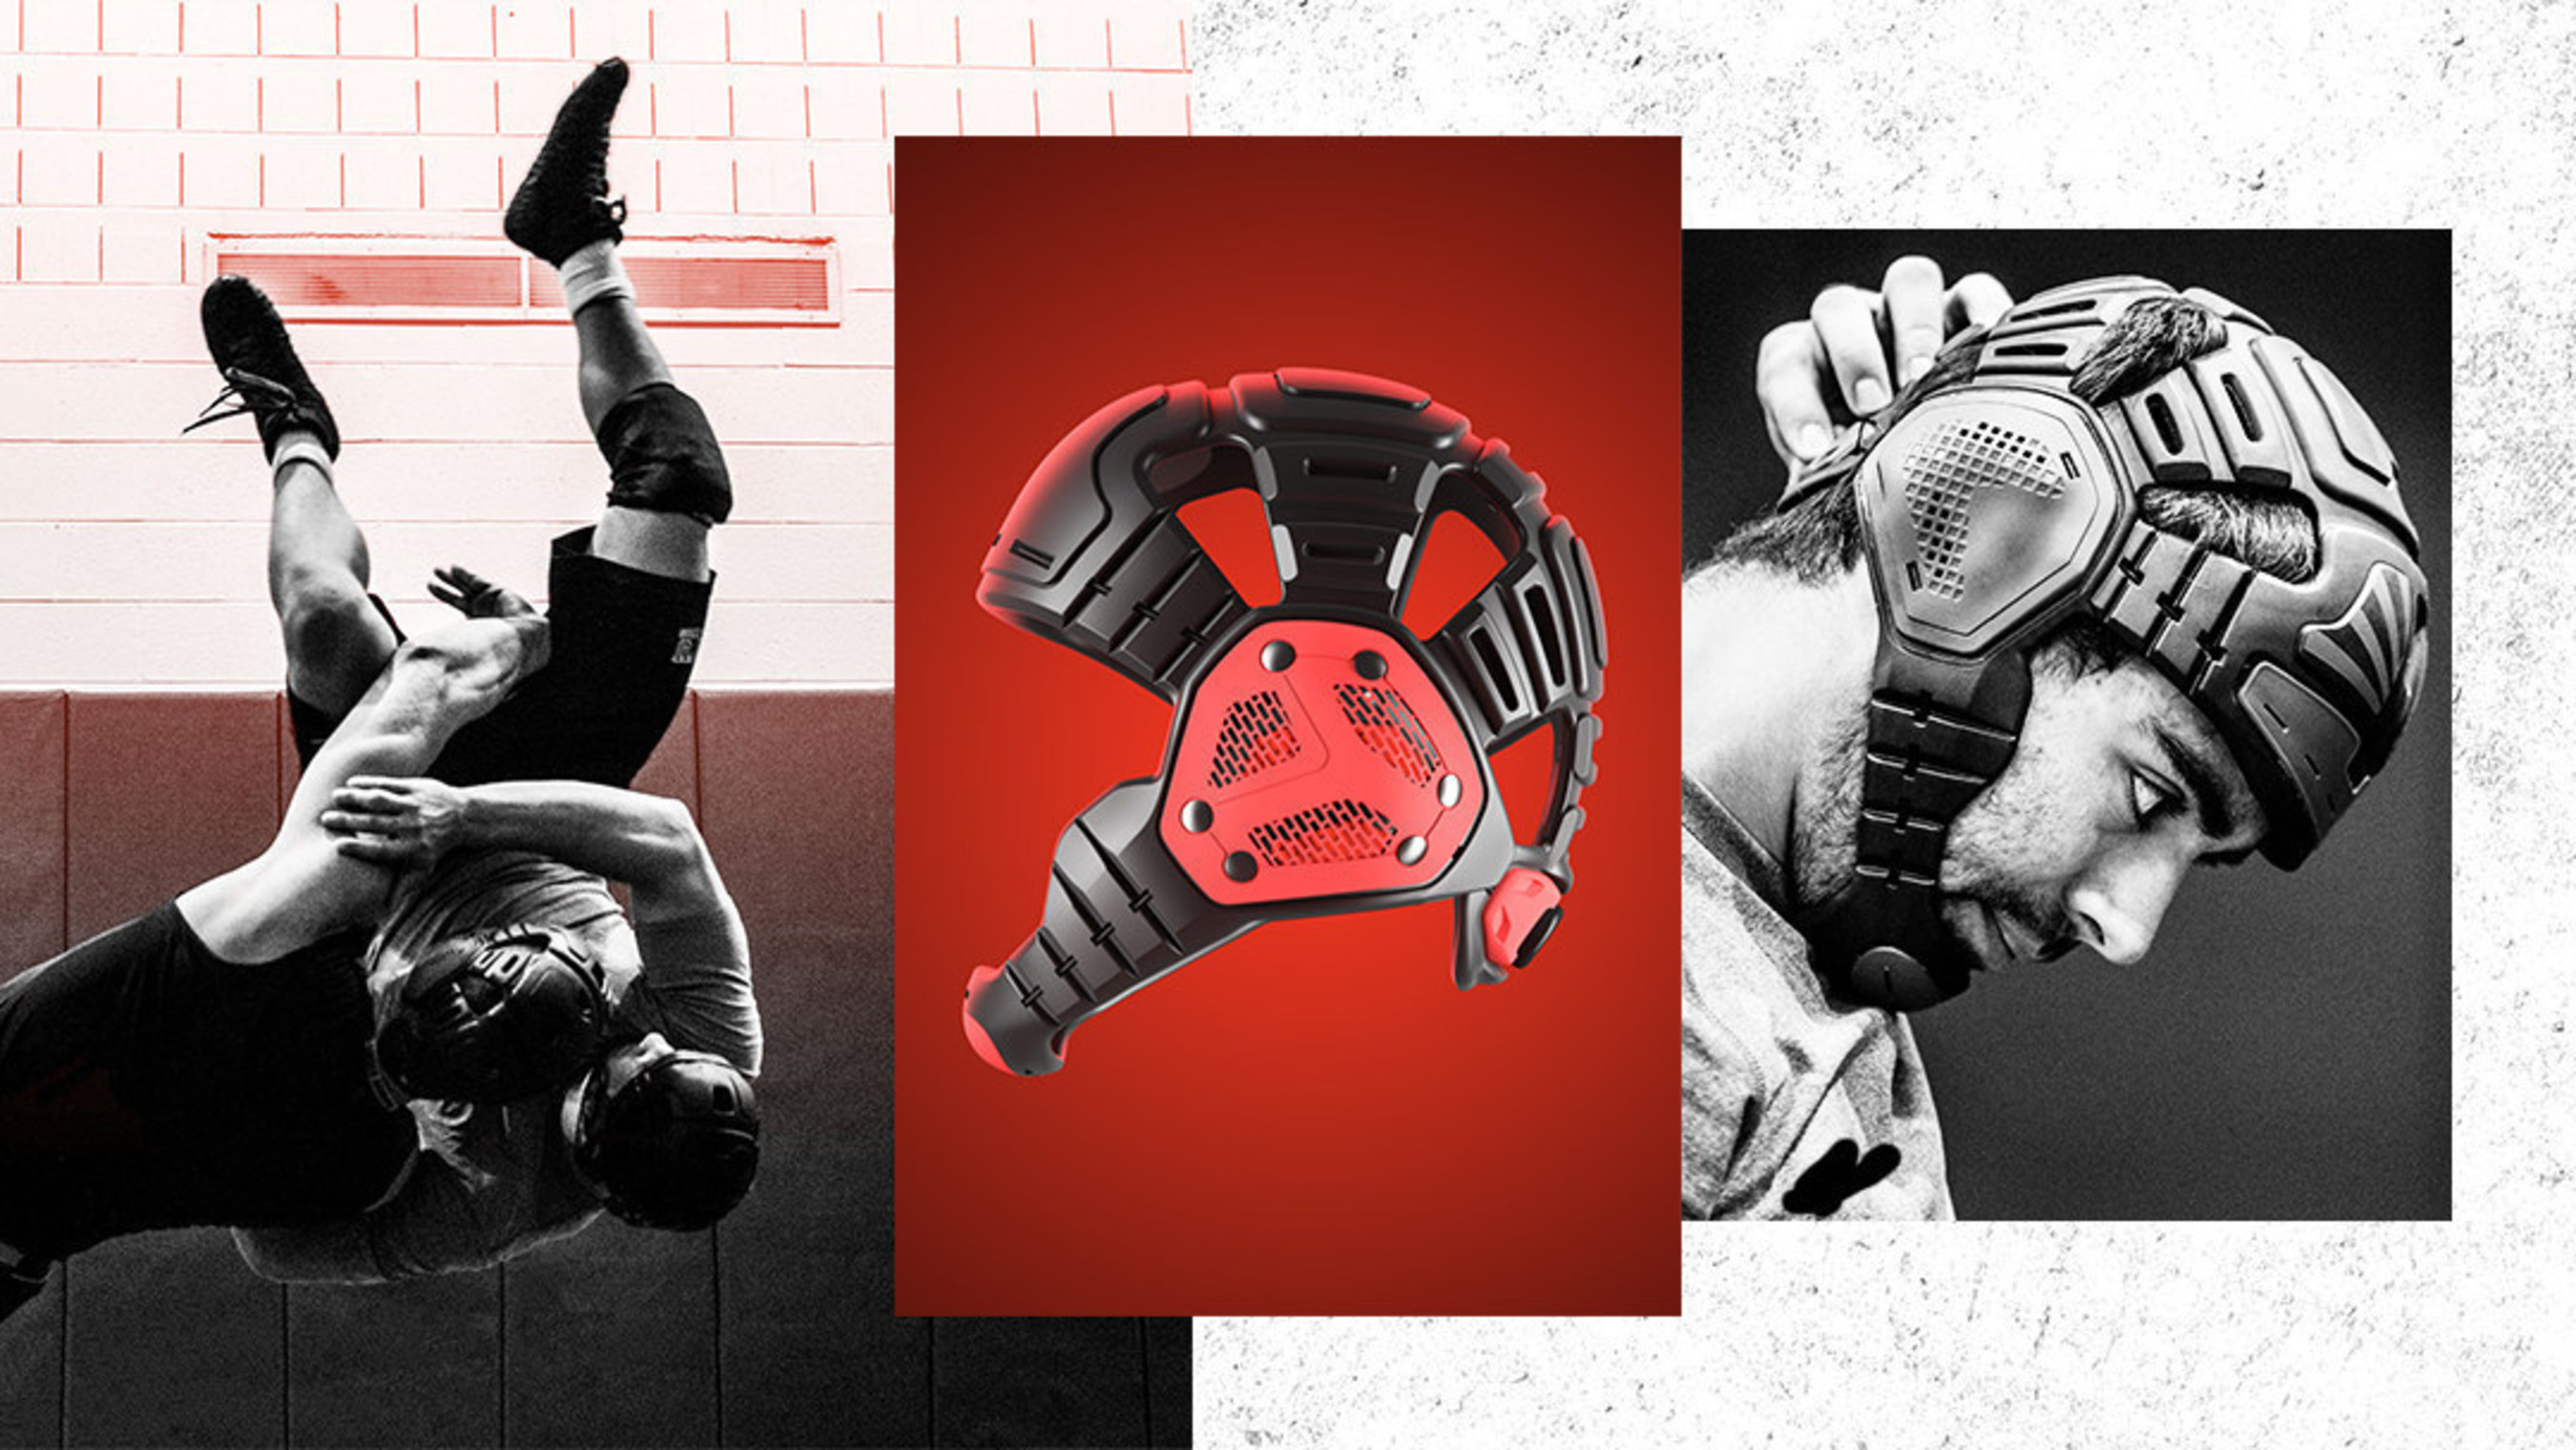 Sports technology startup BATS-TOI(TM) is set to revolutionize safety in contact sports, beginning with its flagship product - the award-winning, state-of-the-art, protective wrestling helmet, The Mercado(TM)